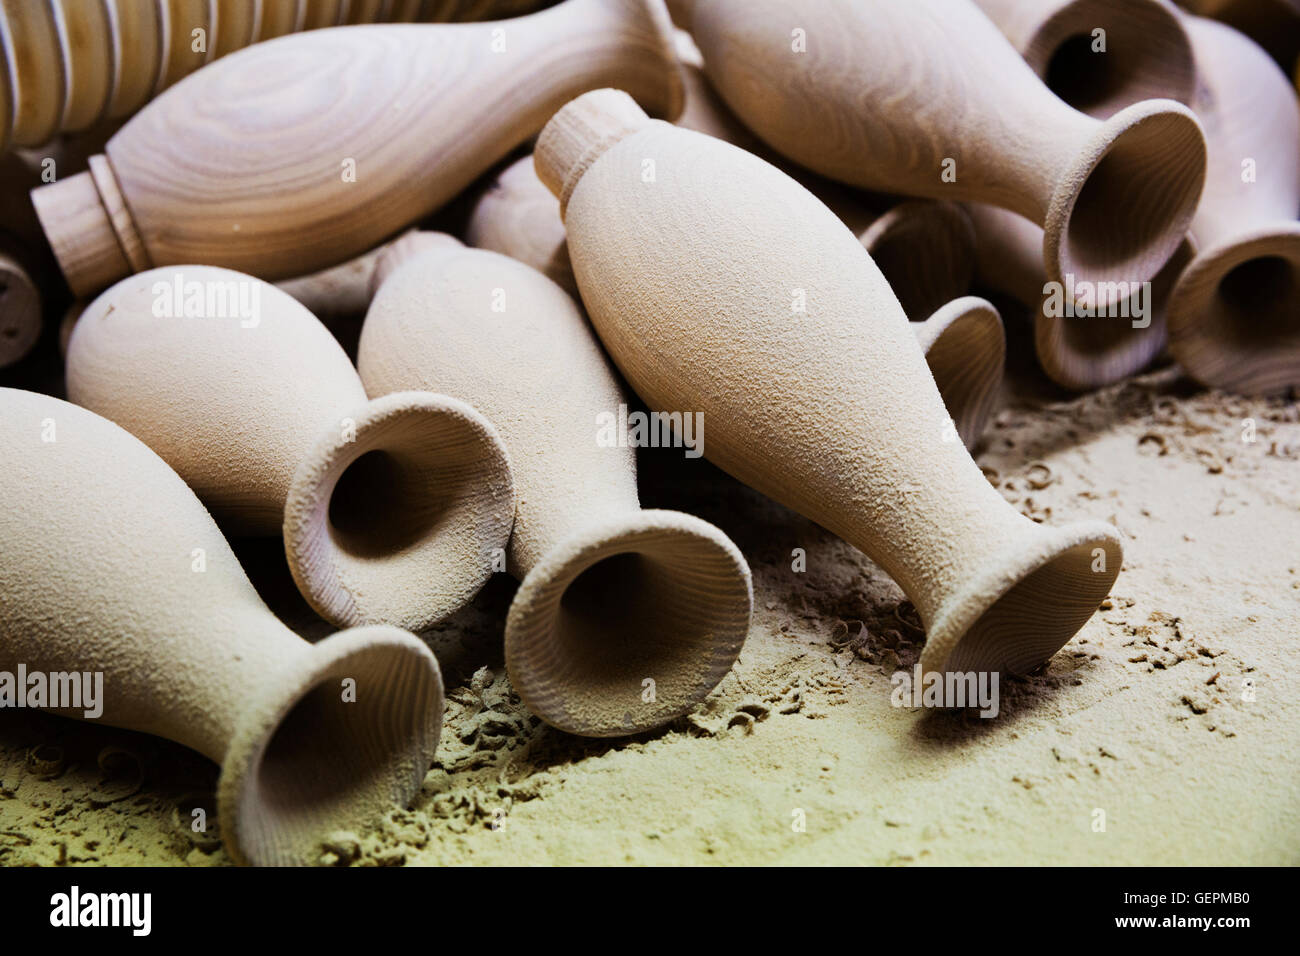 Close up of a pile of turned wooden pieces, spindles lying in a carpentry workshop. Stock Photo